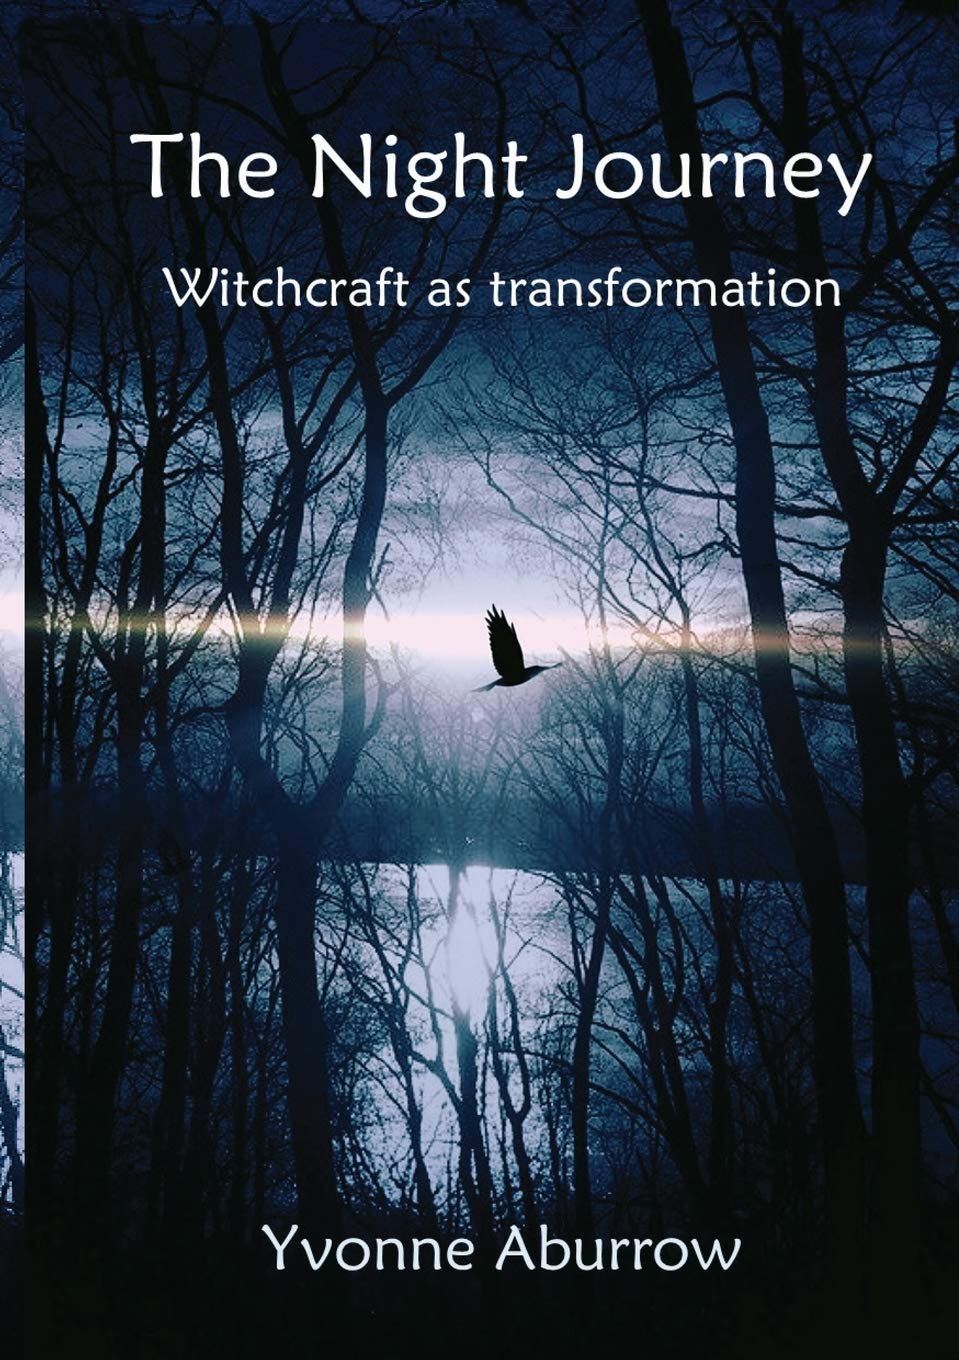 The Night Journey: Witchcraft As Transformation [Yvonne Aburrow]